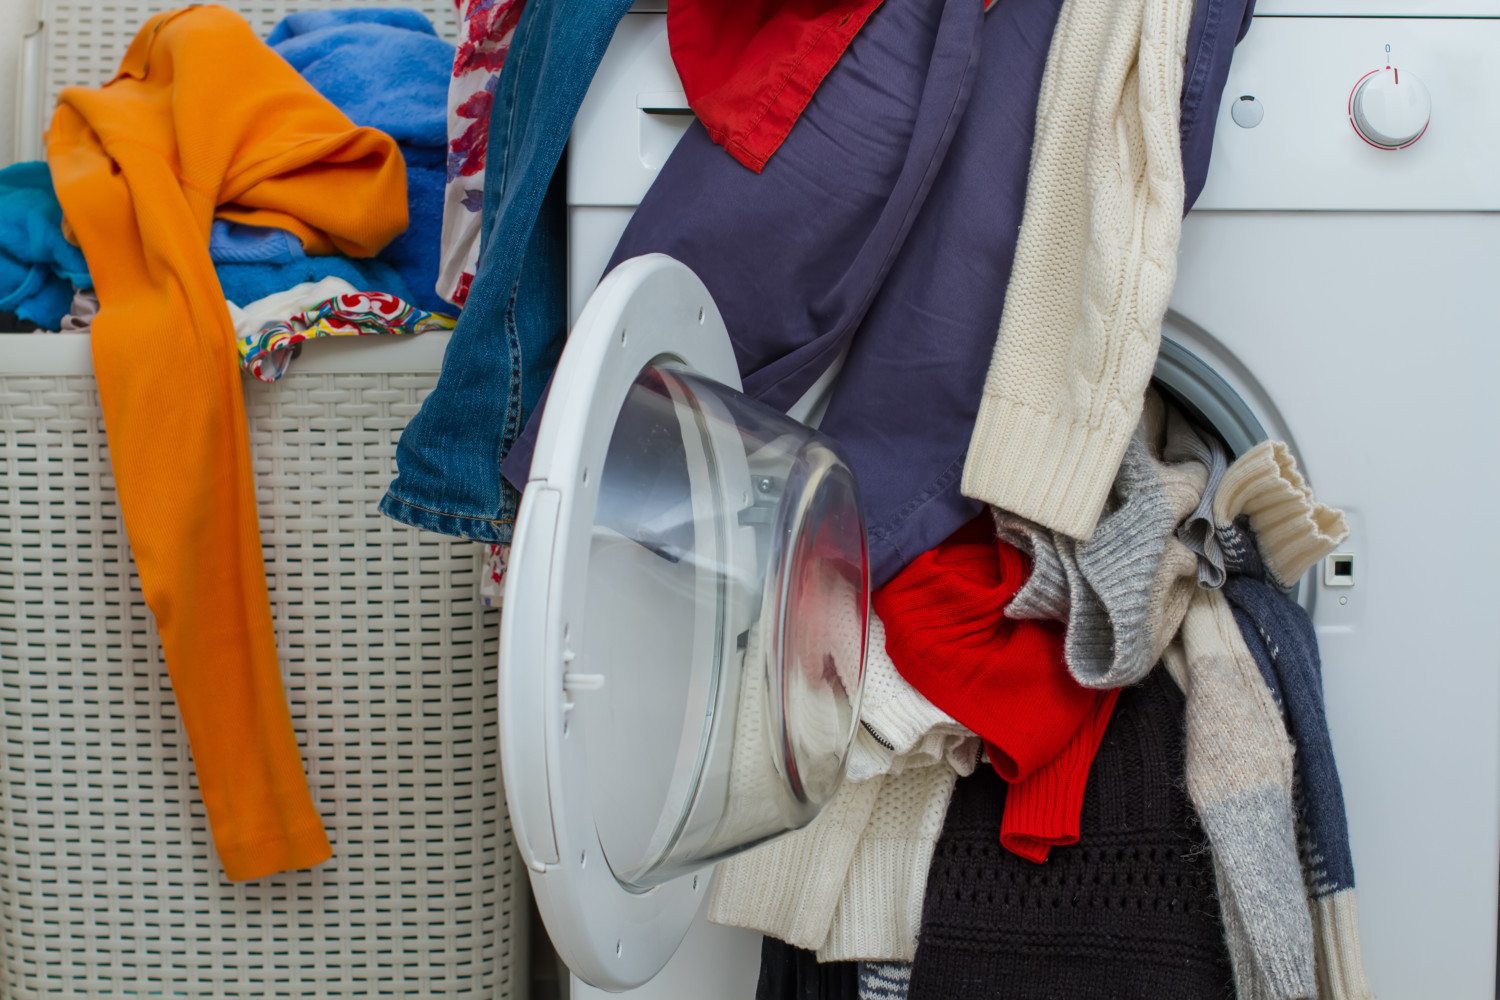 How To Organize A Messy Laundry Room - Simplemost